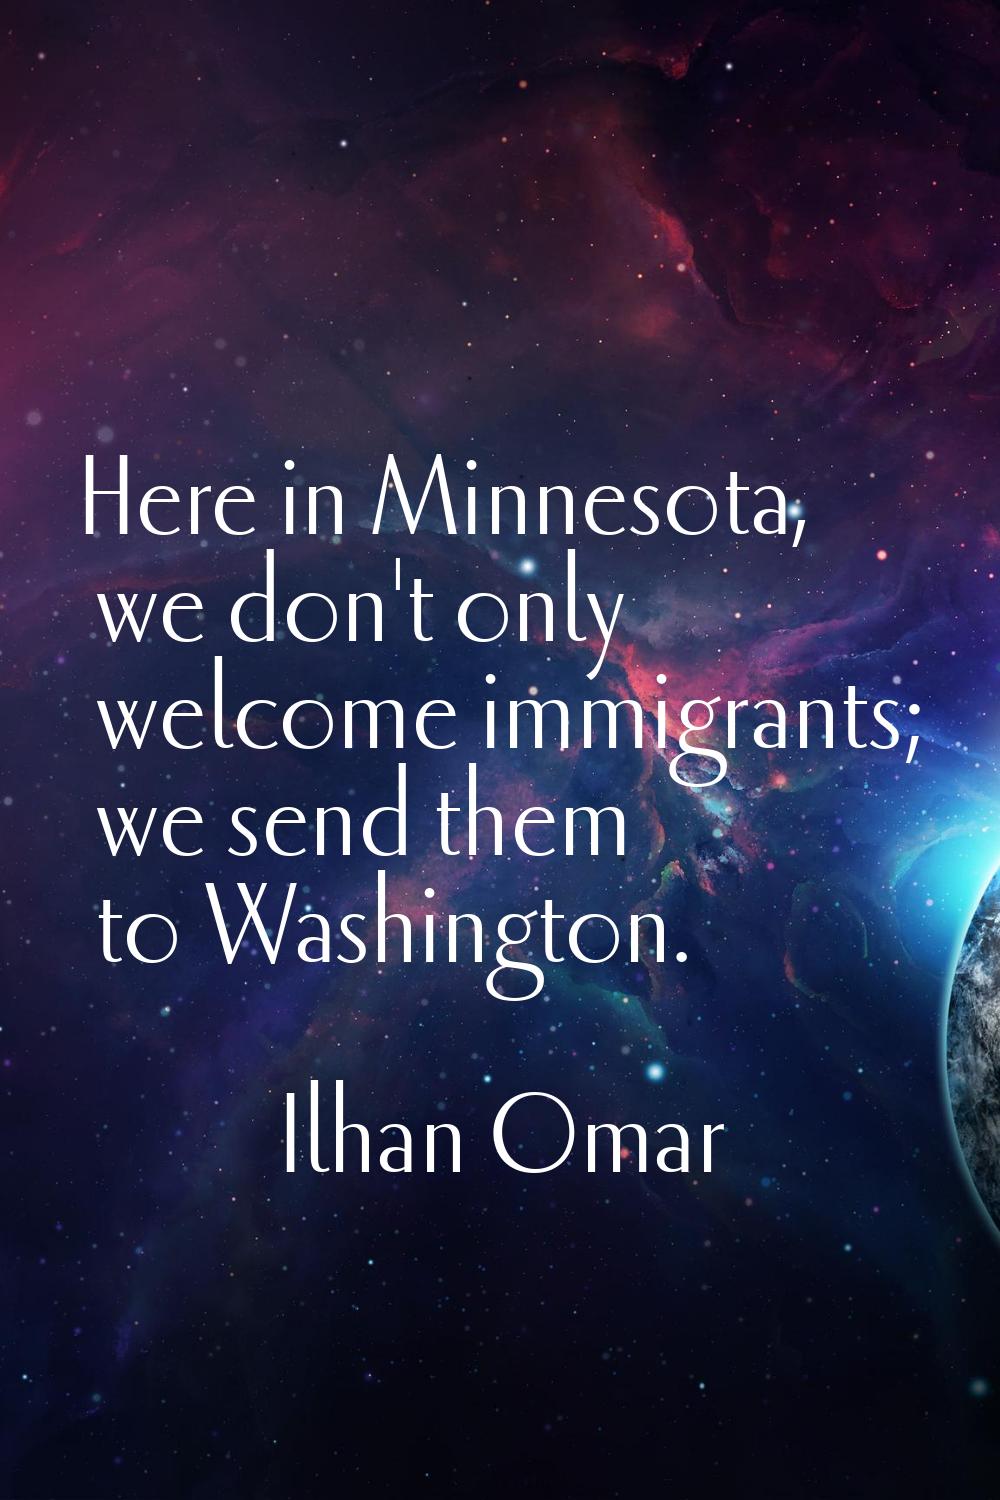 Here in Minnesota, we don't only welcome immigrants; we send them to Washington.